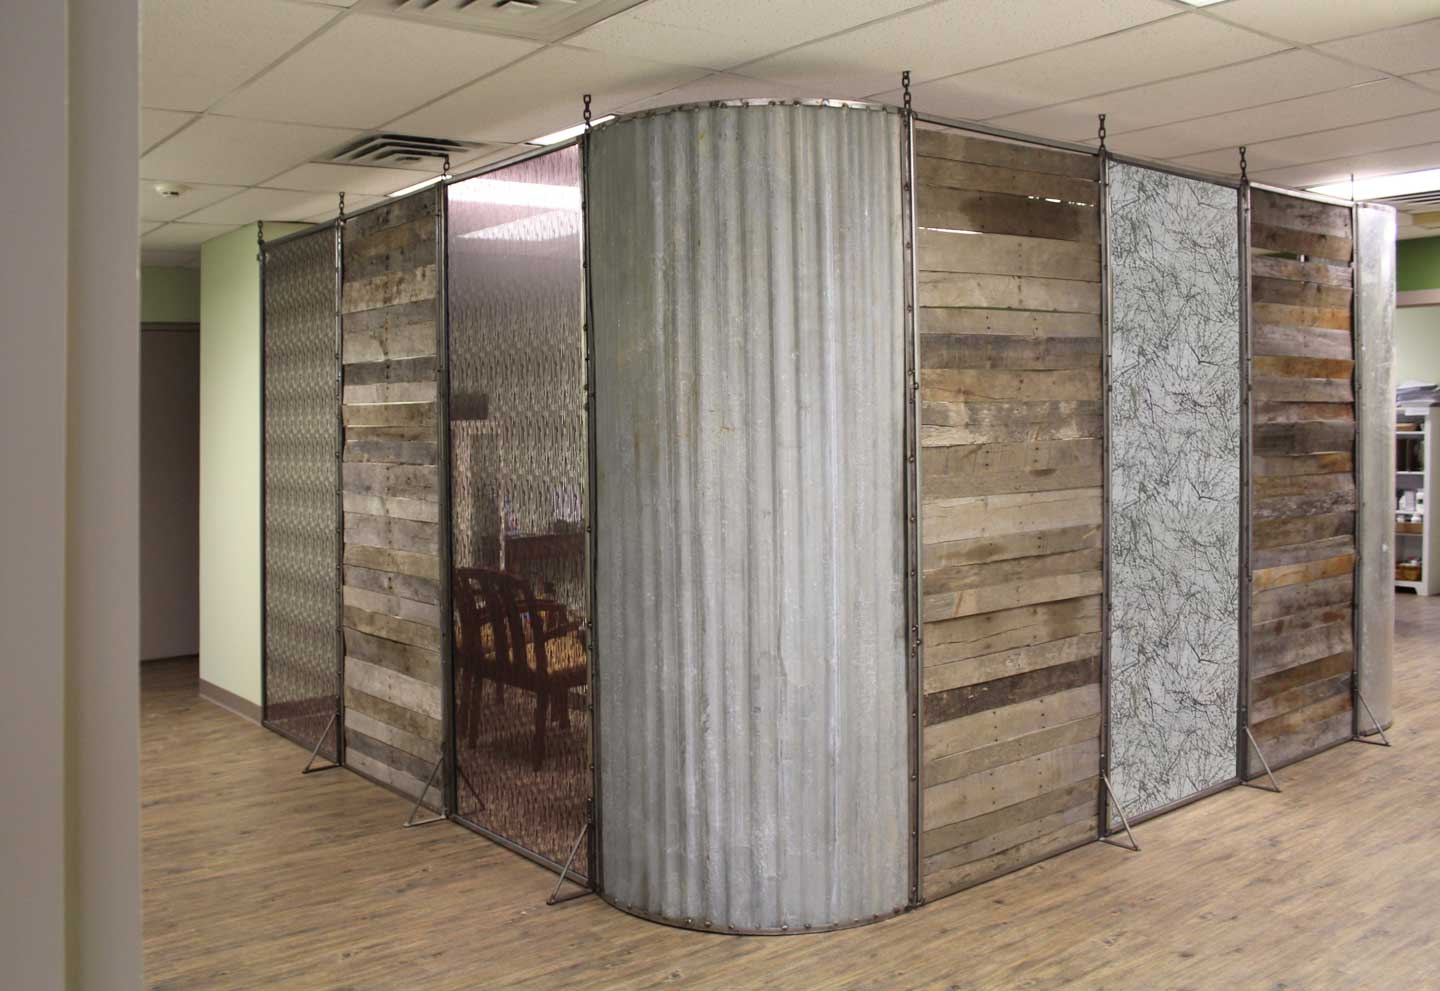 The Use Of Corrugated Metal Wall In A Modern Rustic Clinic Interior 